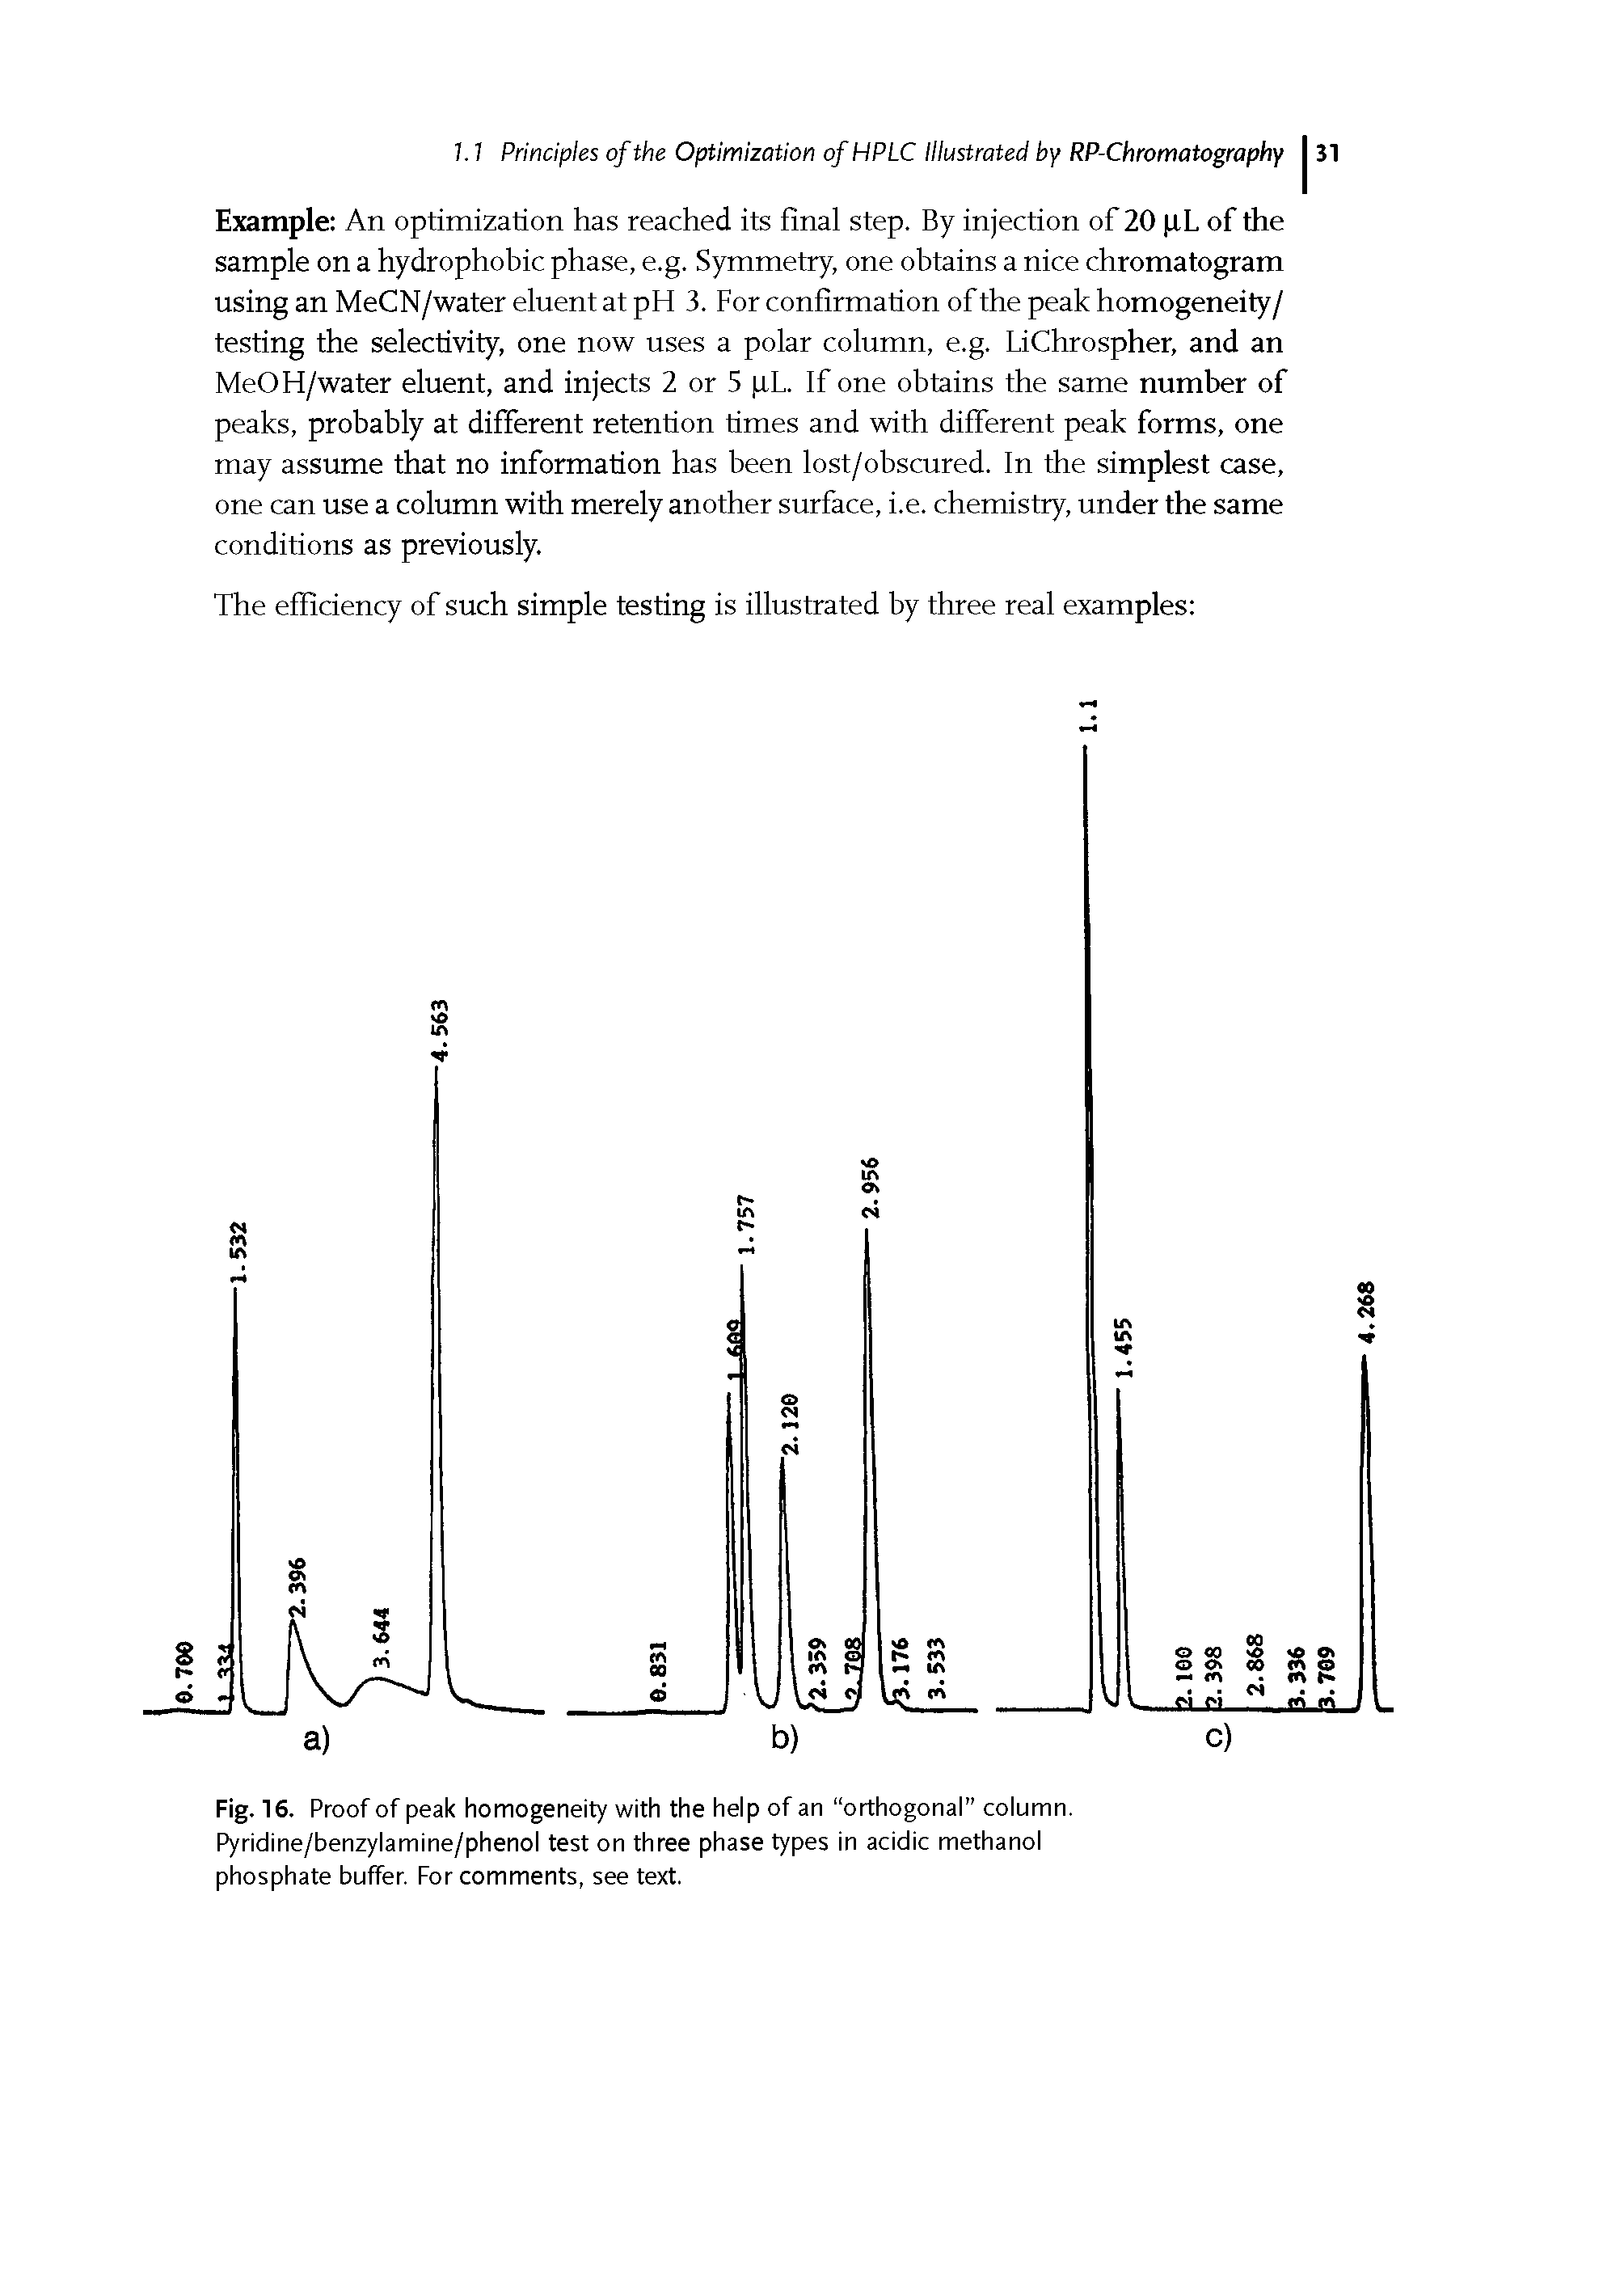 Fig. 16. Proof of peak homogeneity with the help of an orthogonal" column. Pyridine/benzylamine/phenol test on three phase types in acidic methanol phosphate buffer. For comments, see text.